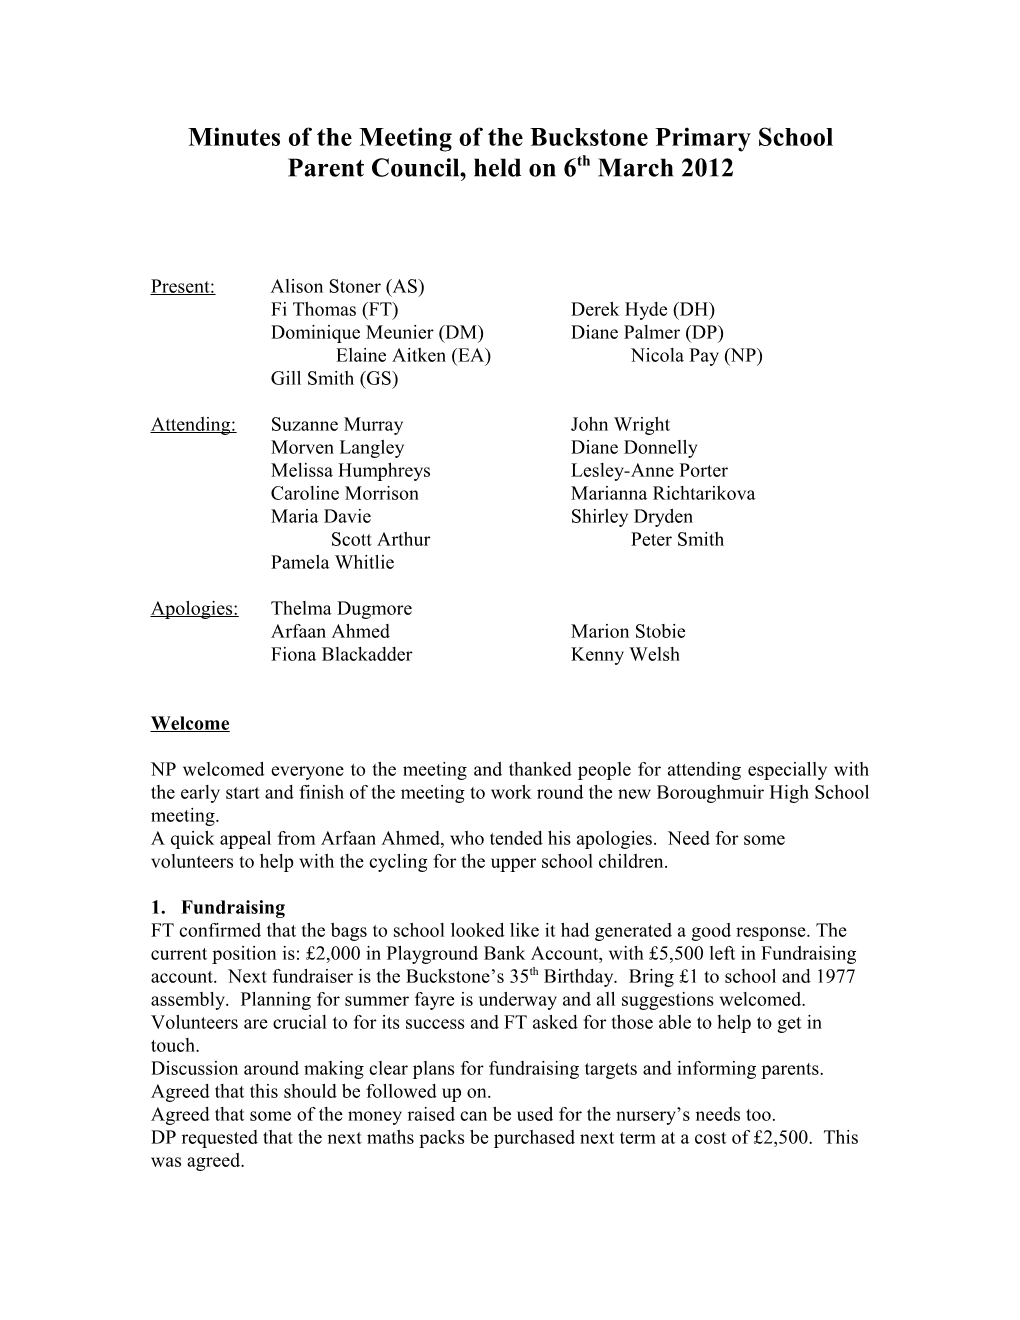 Minutes of the Meeting of the Buckstone Parent Council, Held on The